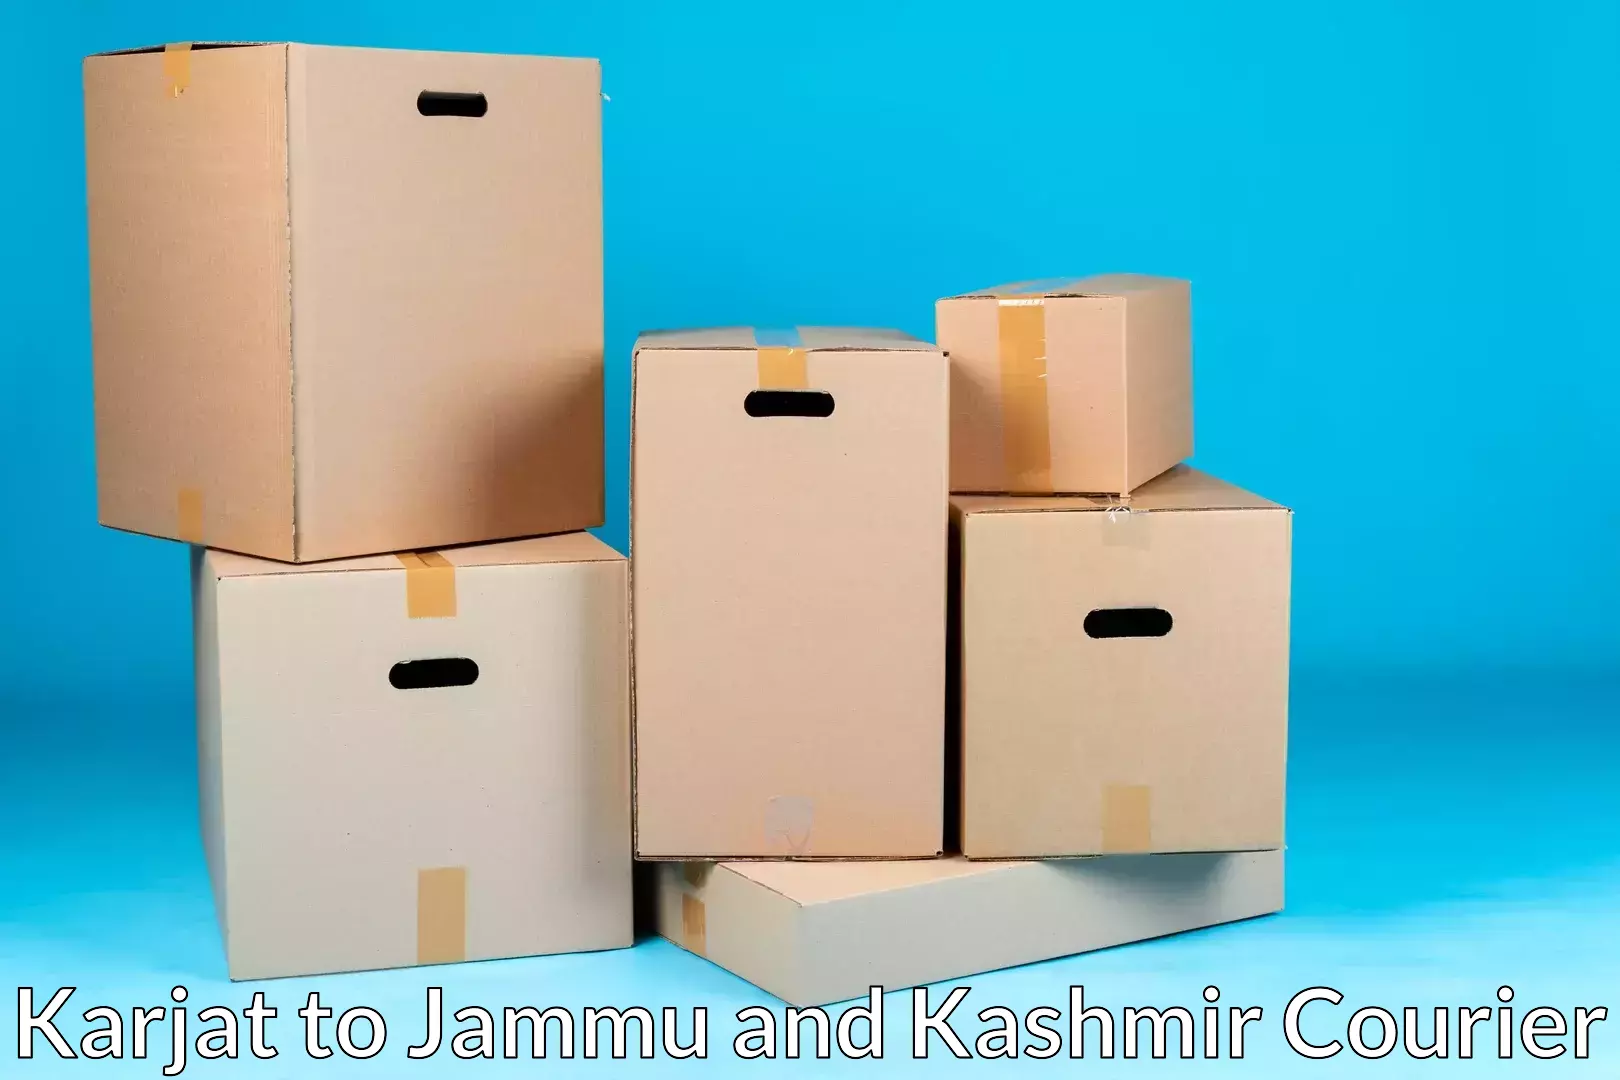 Personalized moving service in Karjat to Hiranagar